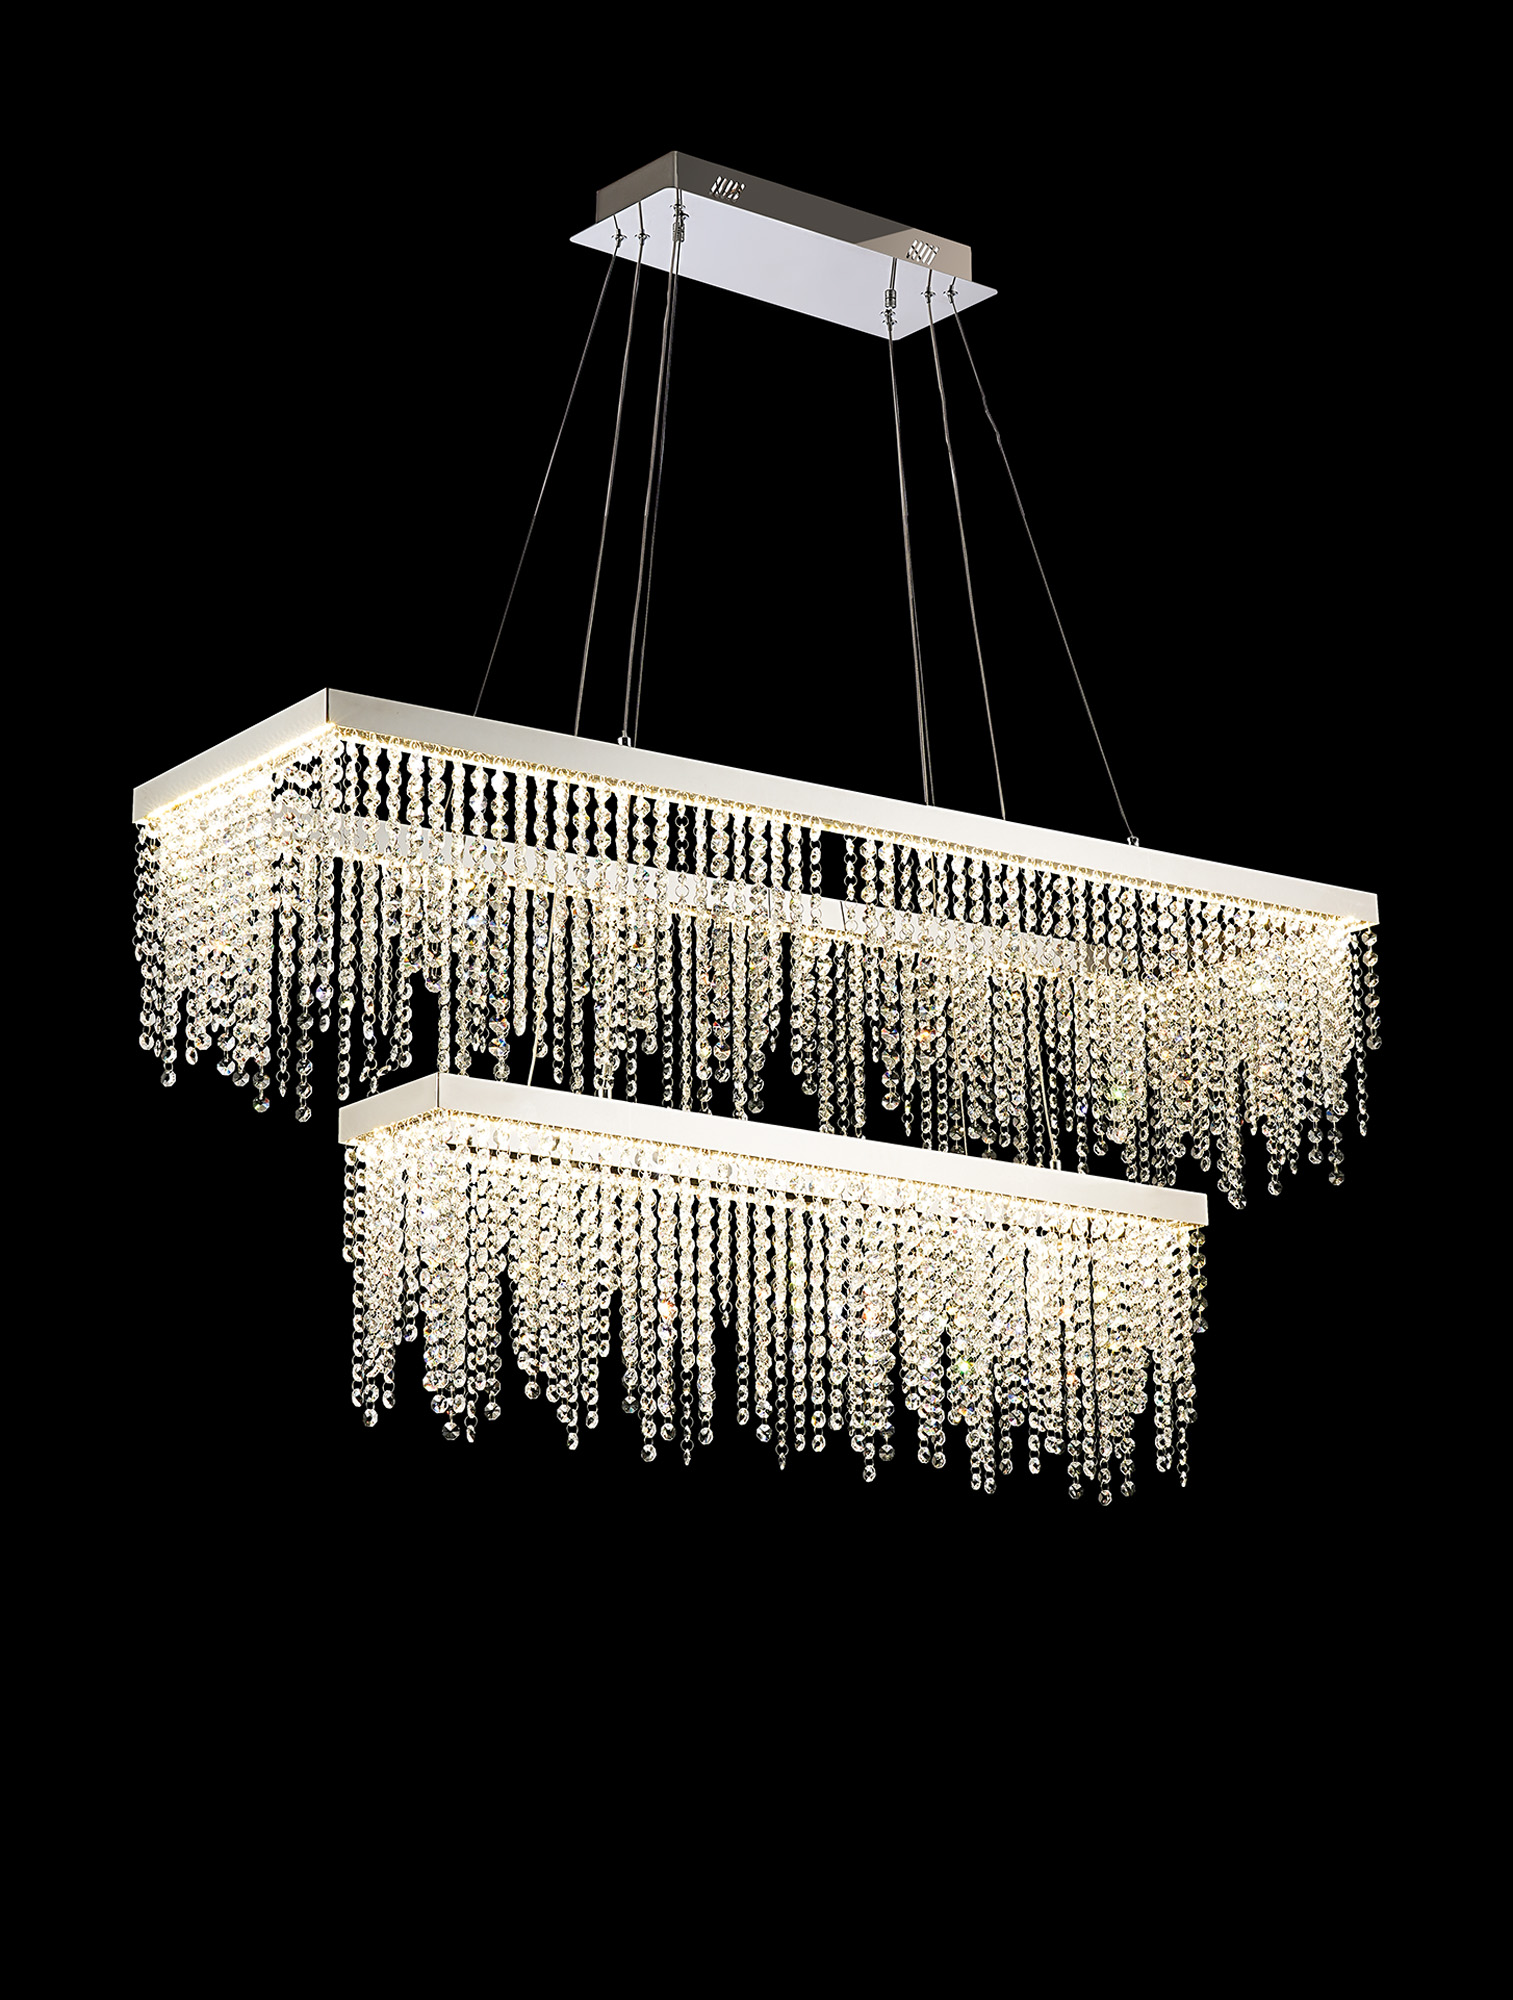 IL32865  Bano Rectangular Dimmable 2 Tier Pendant 65W LED Polished Chrome